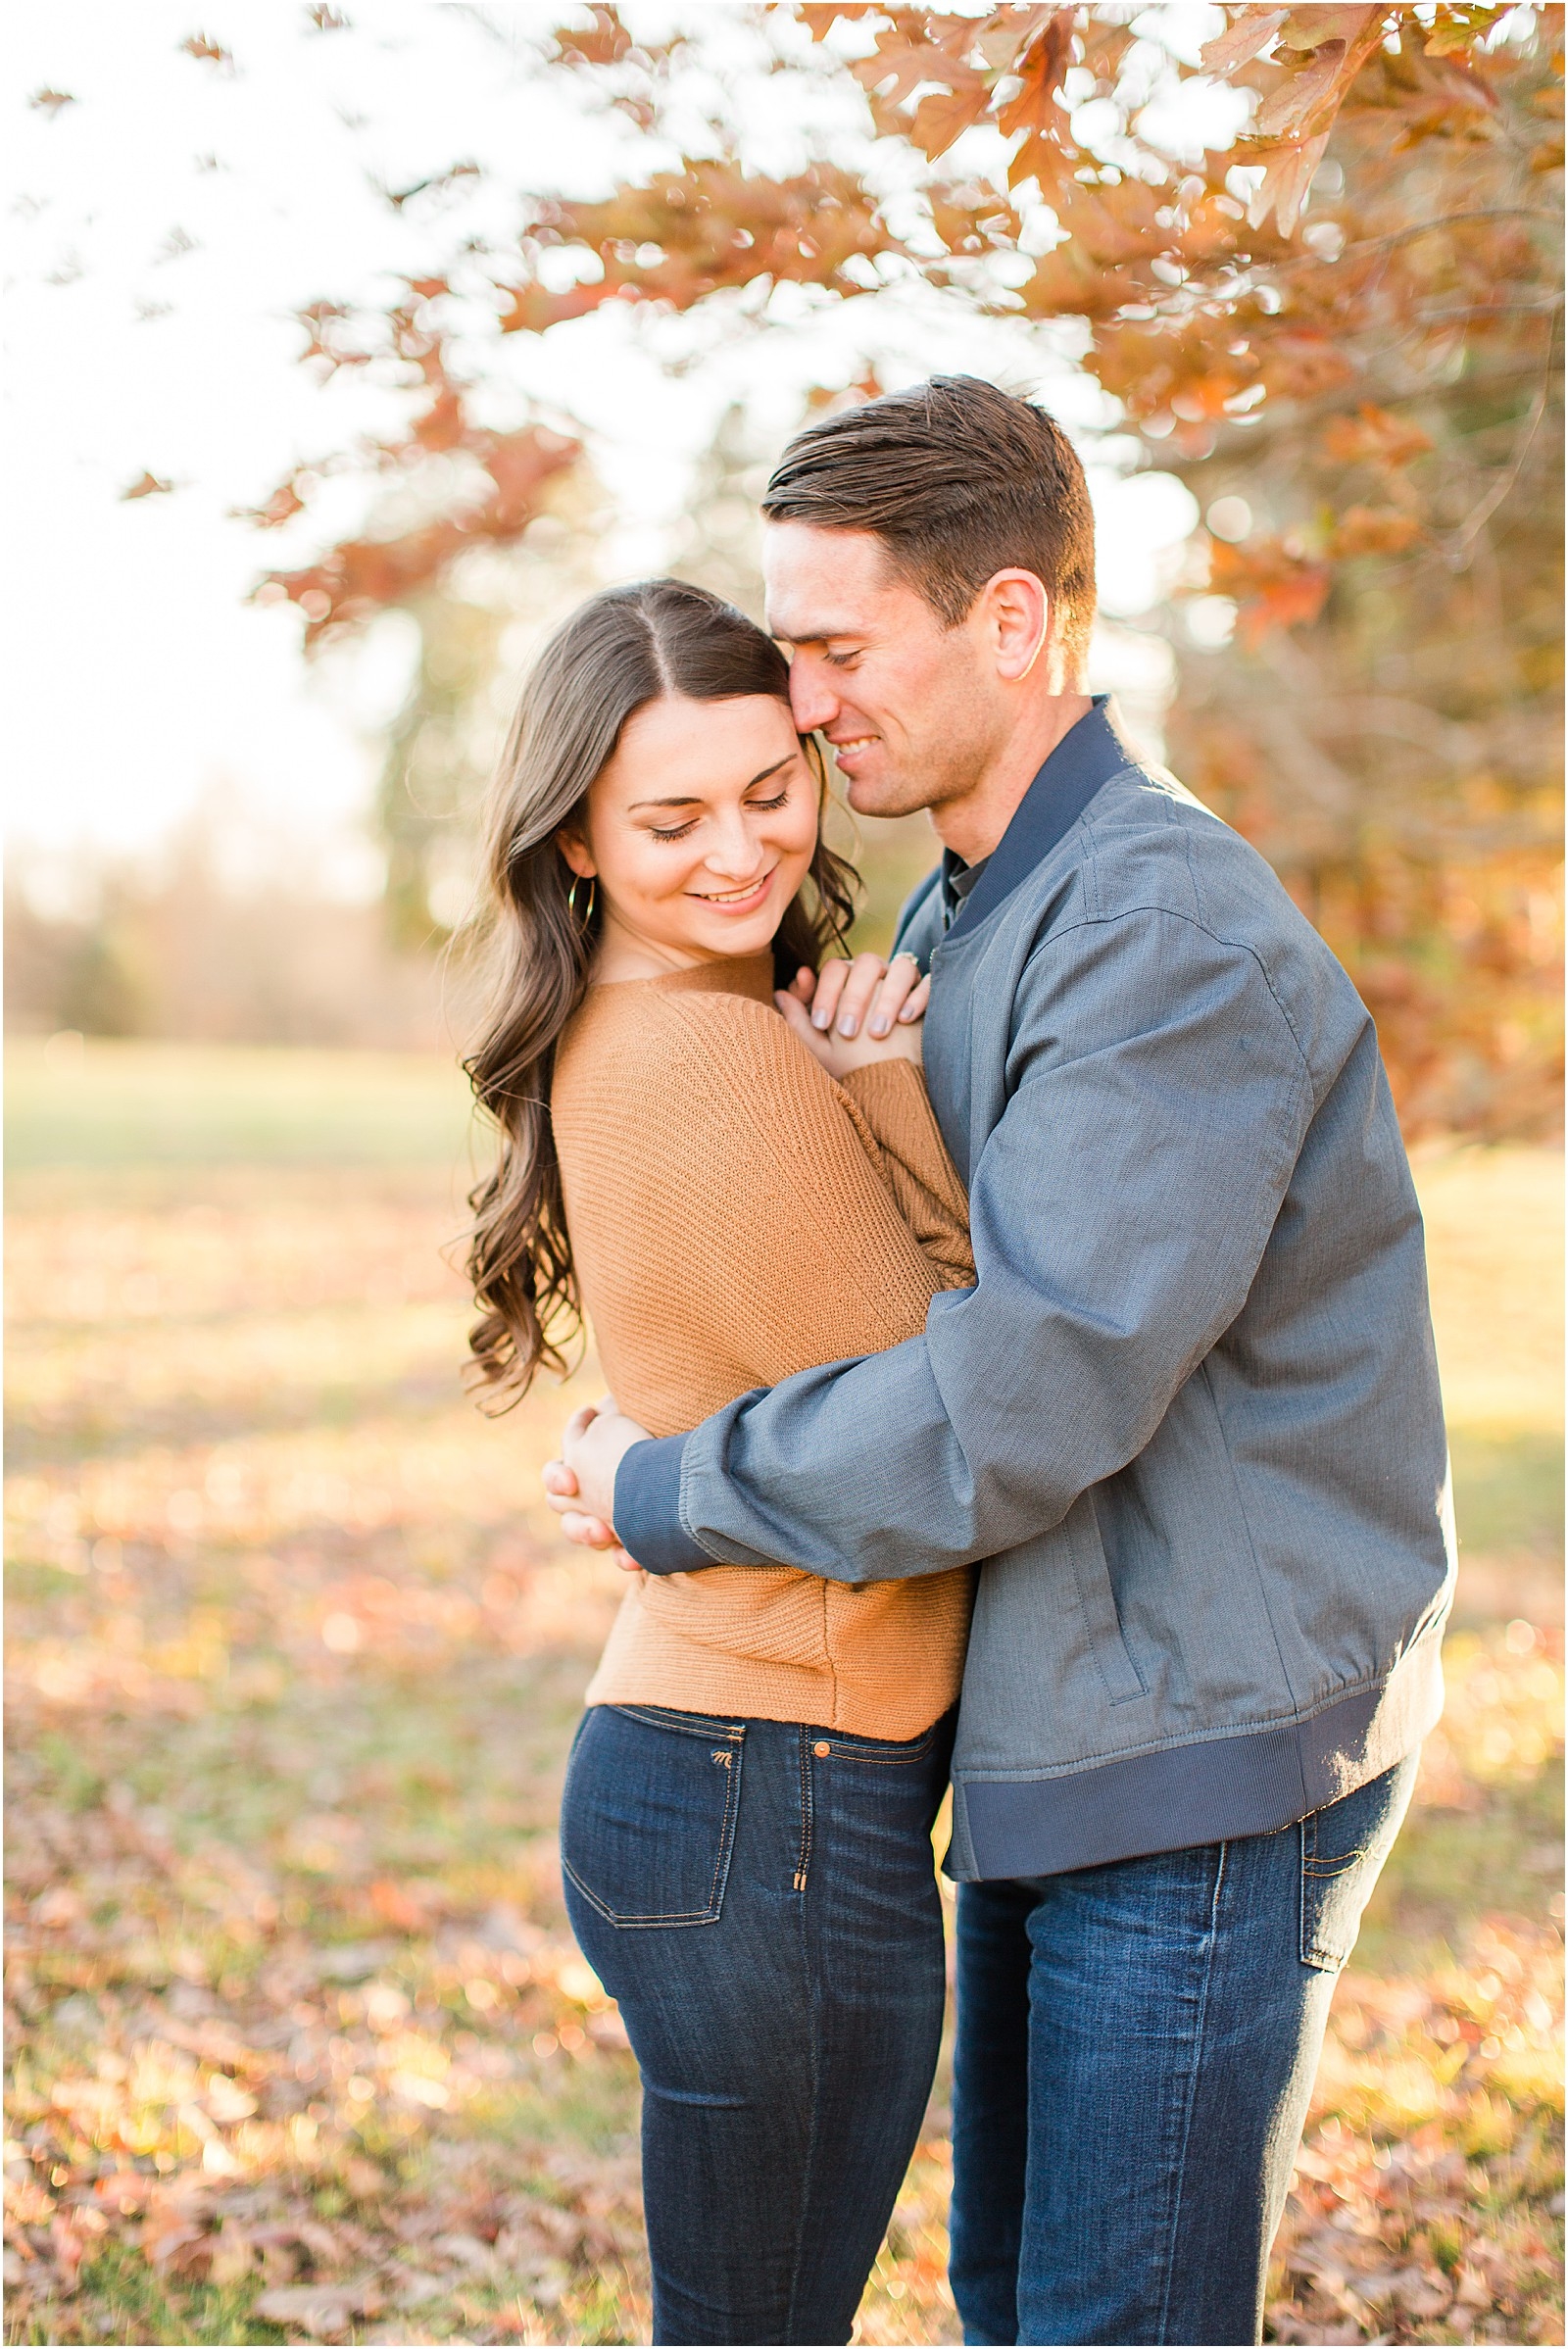 Kaley and Devon's fall Evansville Indiana engagement session. | #fallengagementsession #evansvilleindiana #evansvilleindianawedding | 0029.jpg